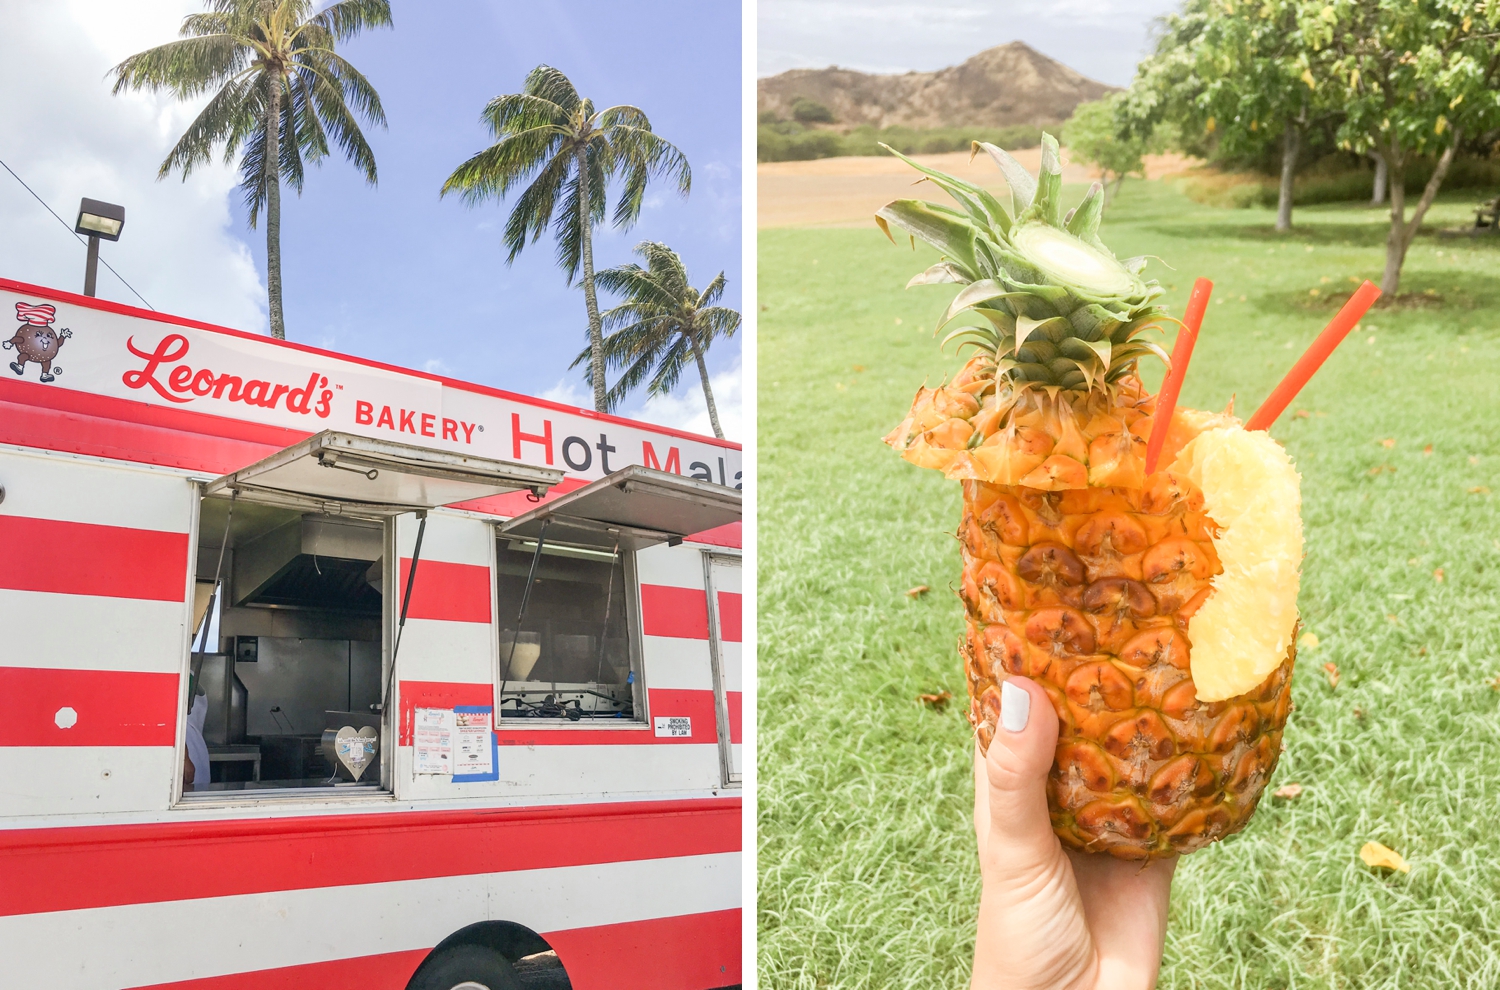 leonards-bakery-in-oahu-hawaii-and-a-girl-holding-a-pineapple-smoothie-at-diamond-head-park